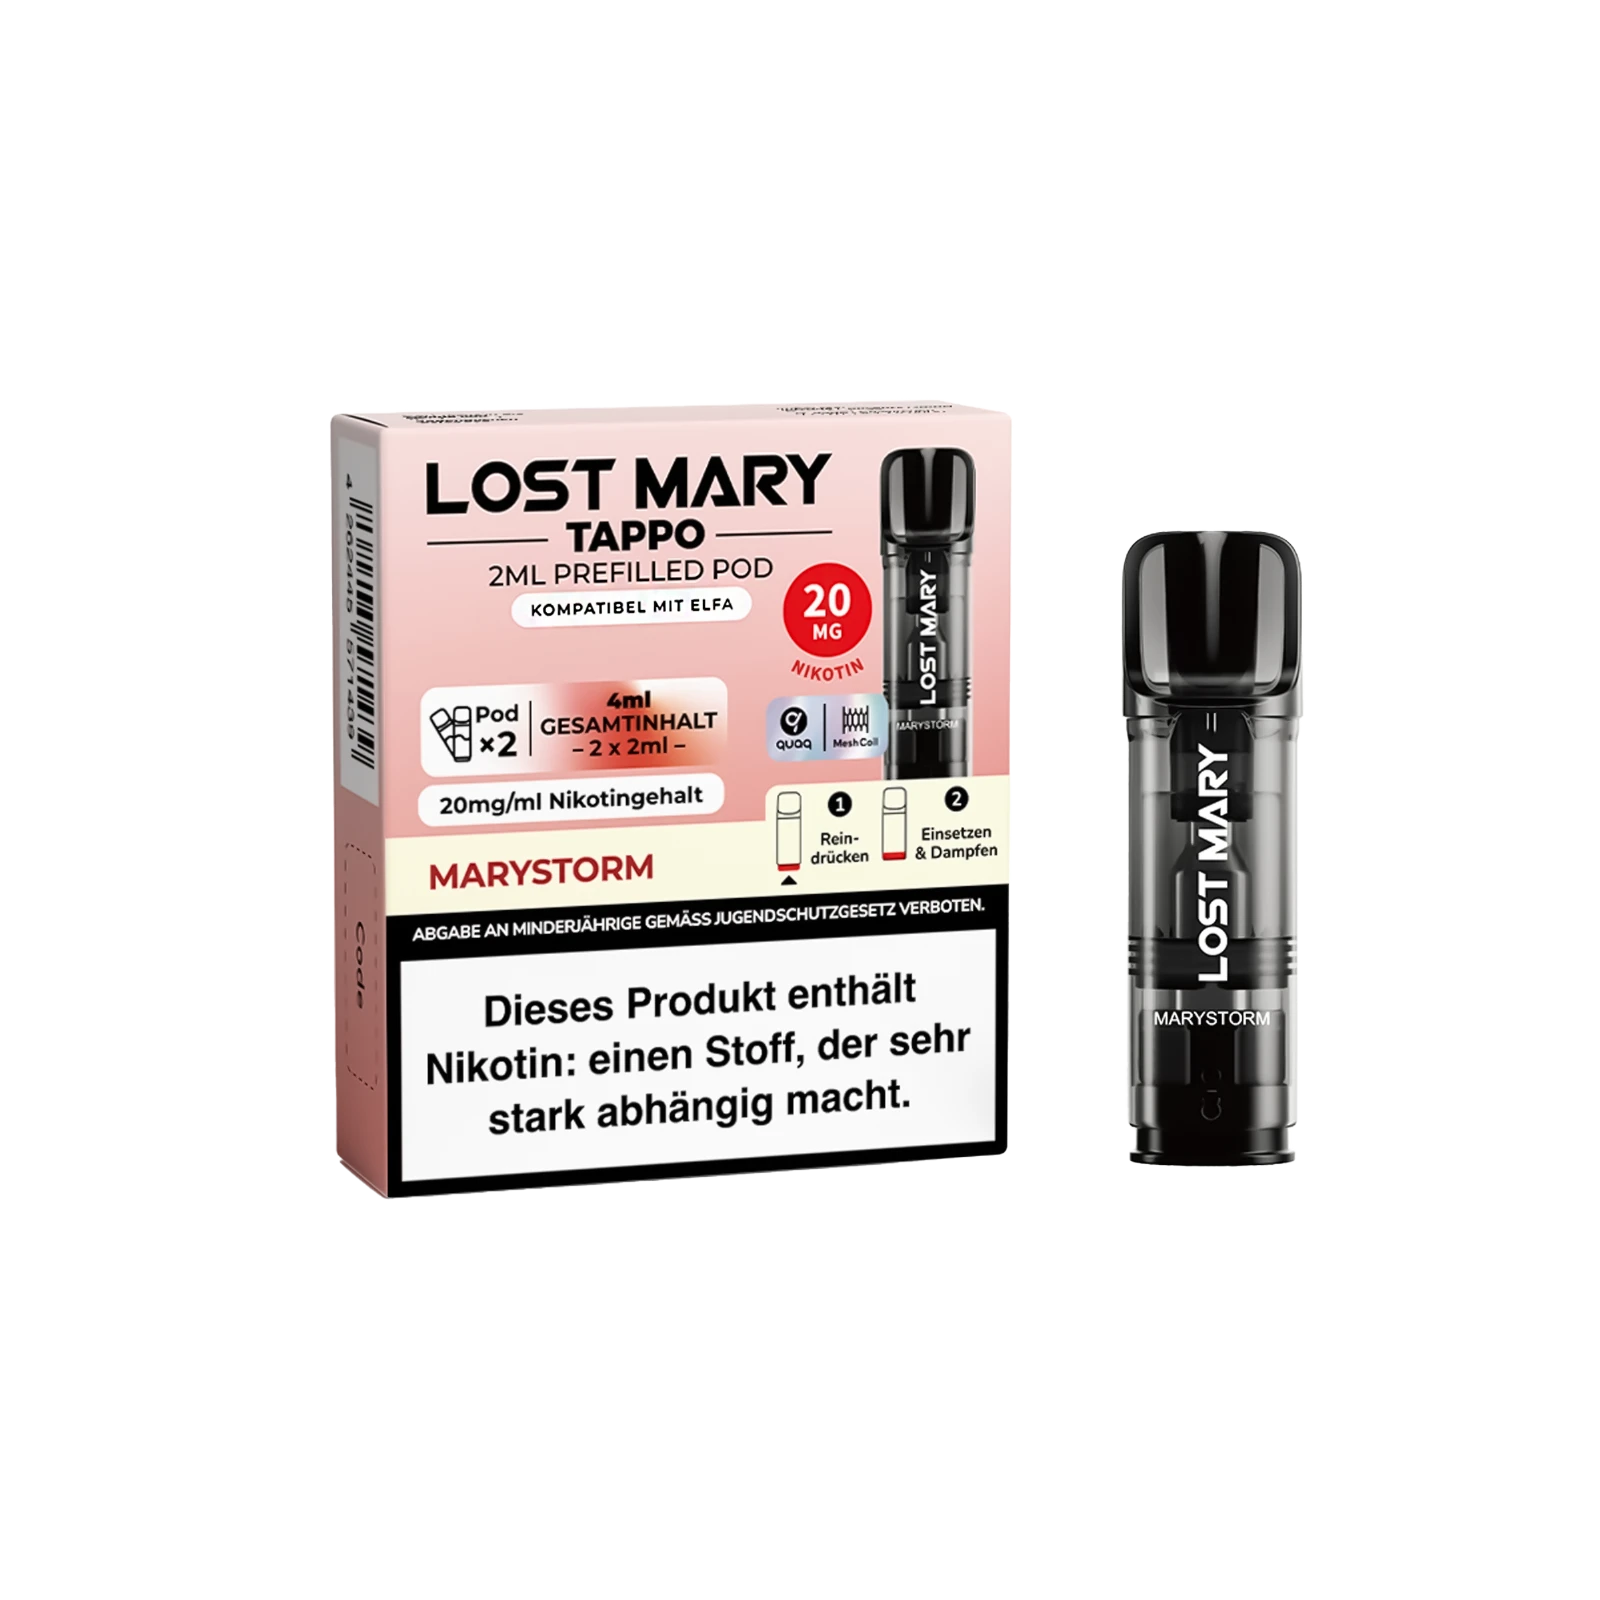 Lost Mary Tappo Marystorm: Umweltfreundliches Pod-System mit Prefilled Pods 2